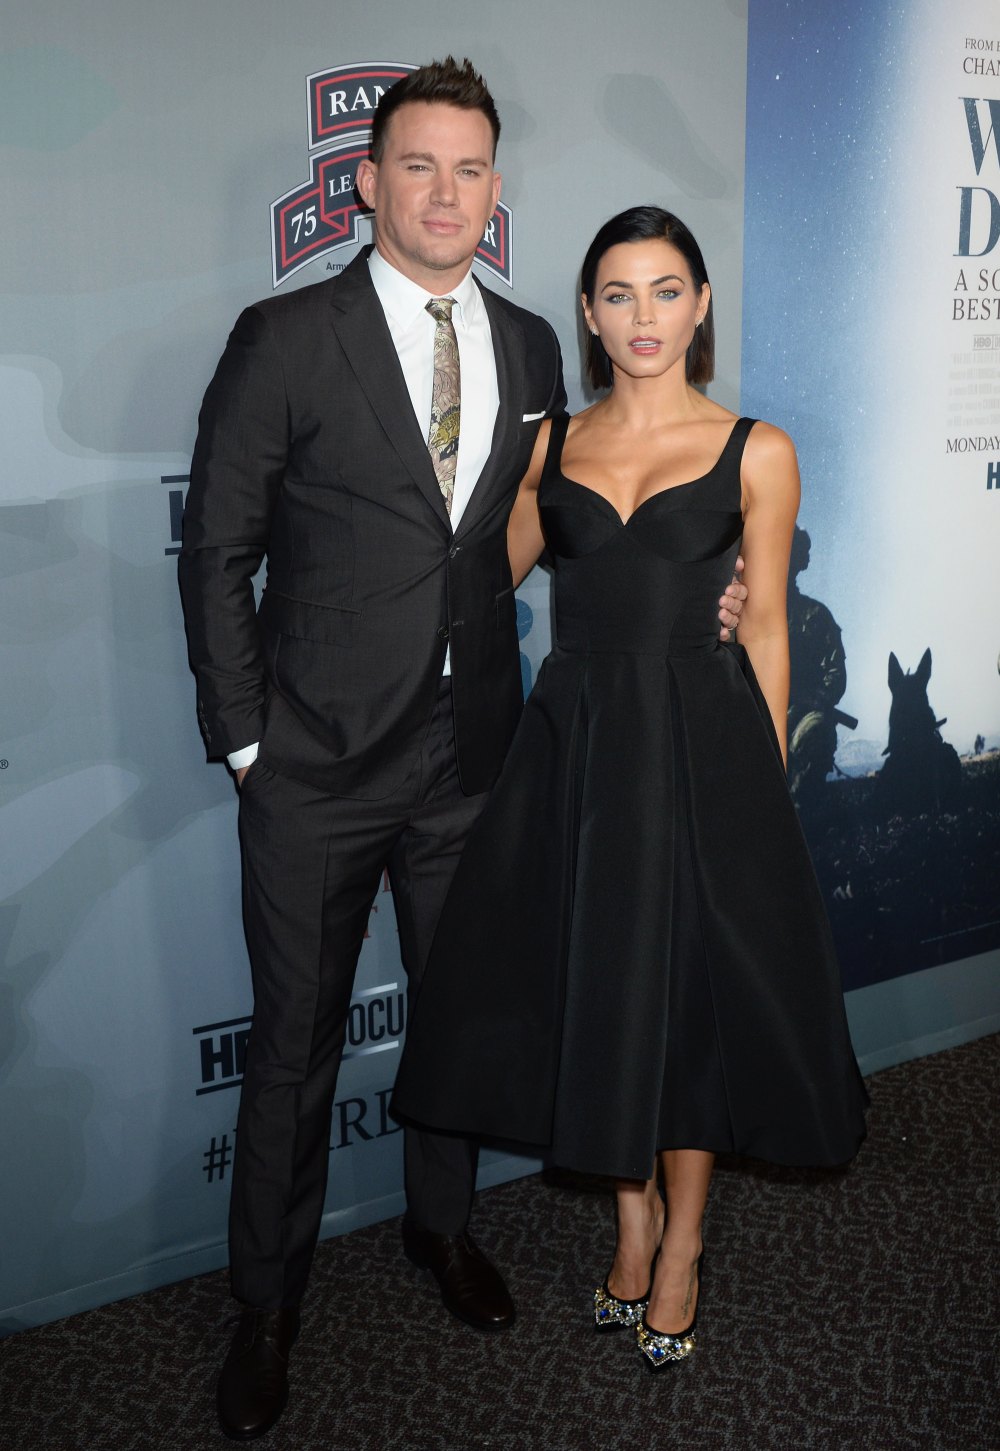 Channing Tatum Has 'The Utmost Respect' for Ex-Wife Jenna Dewan- They Have a 'Wonderful Coparenting Relationship'